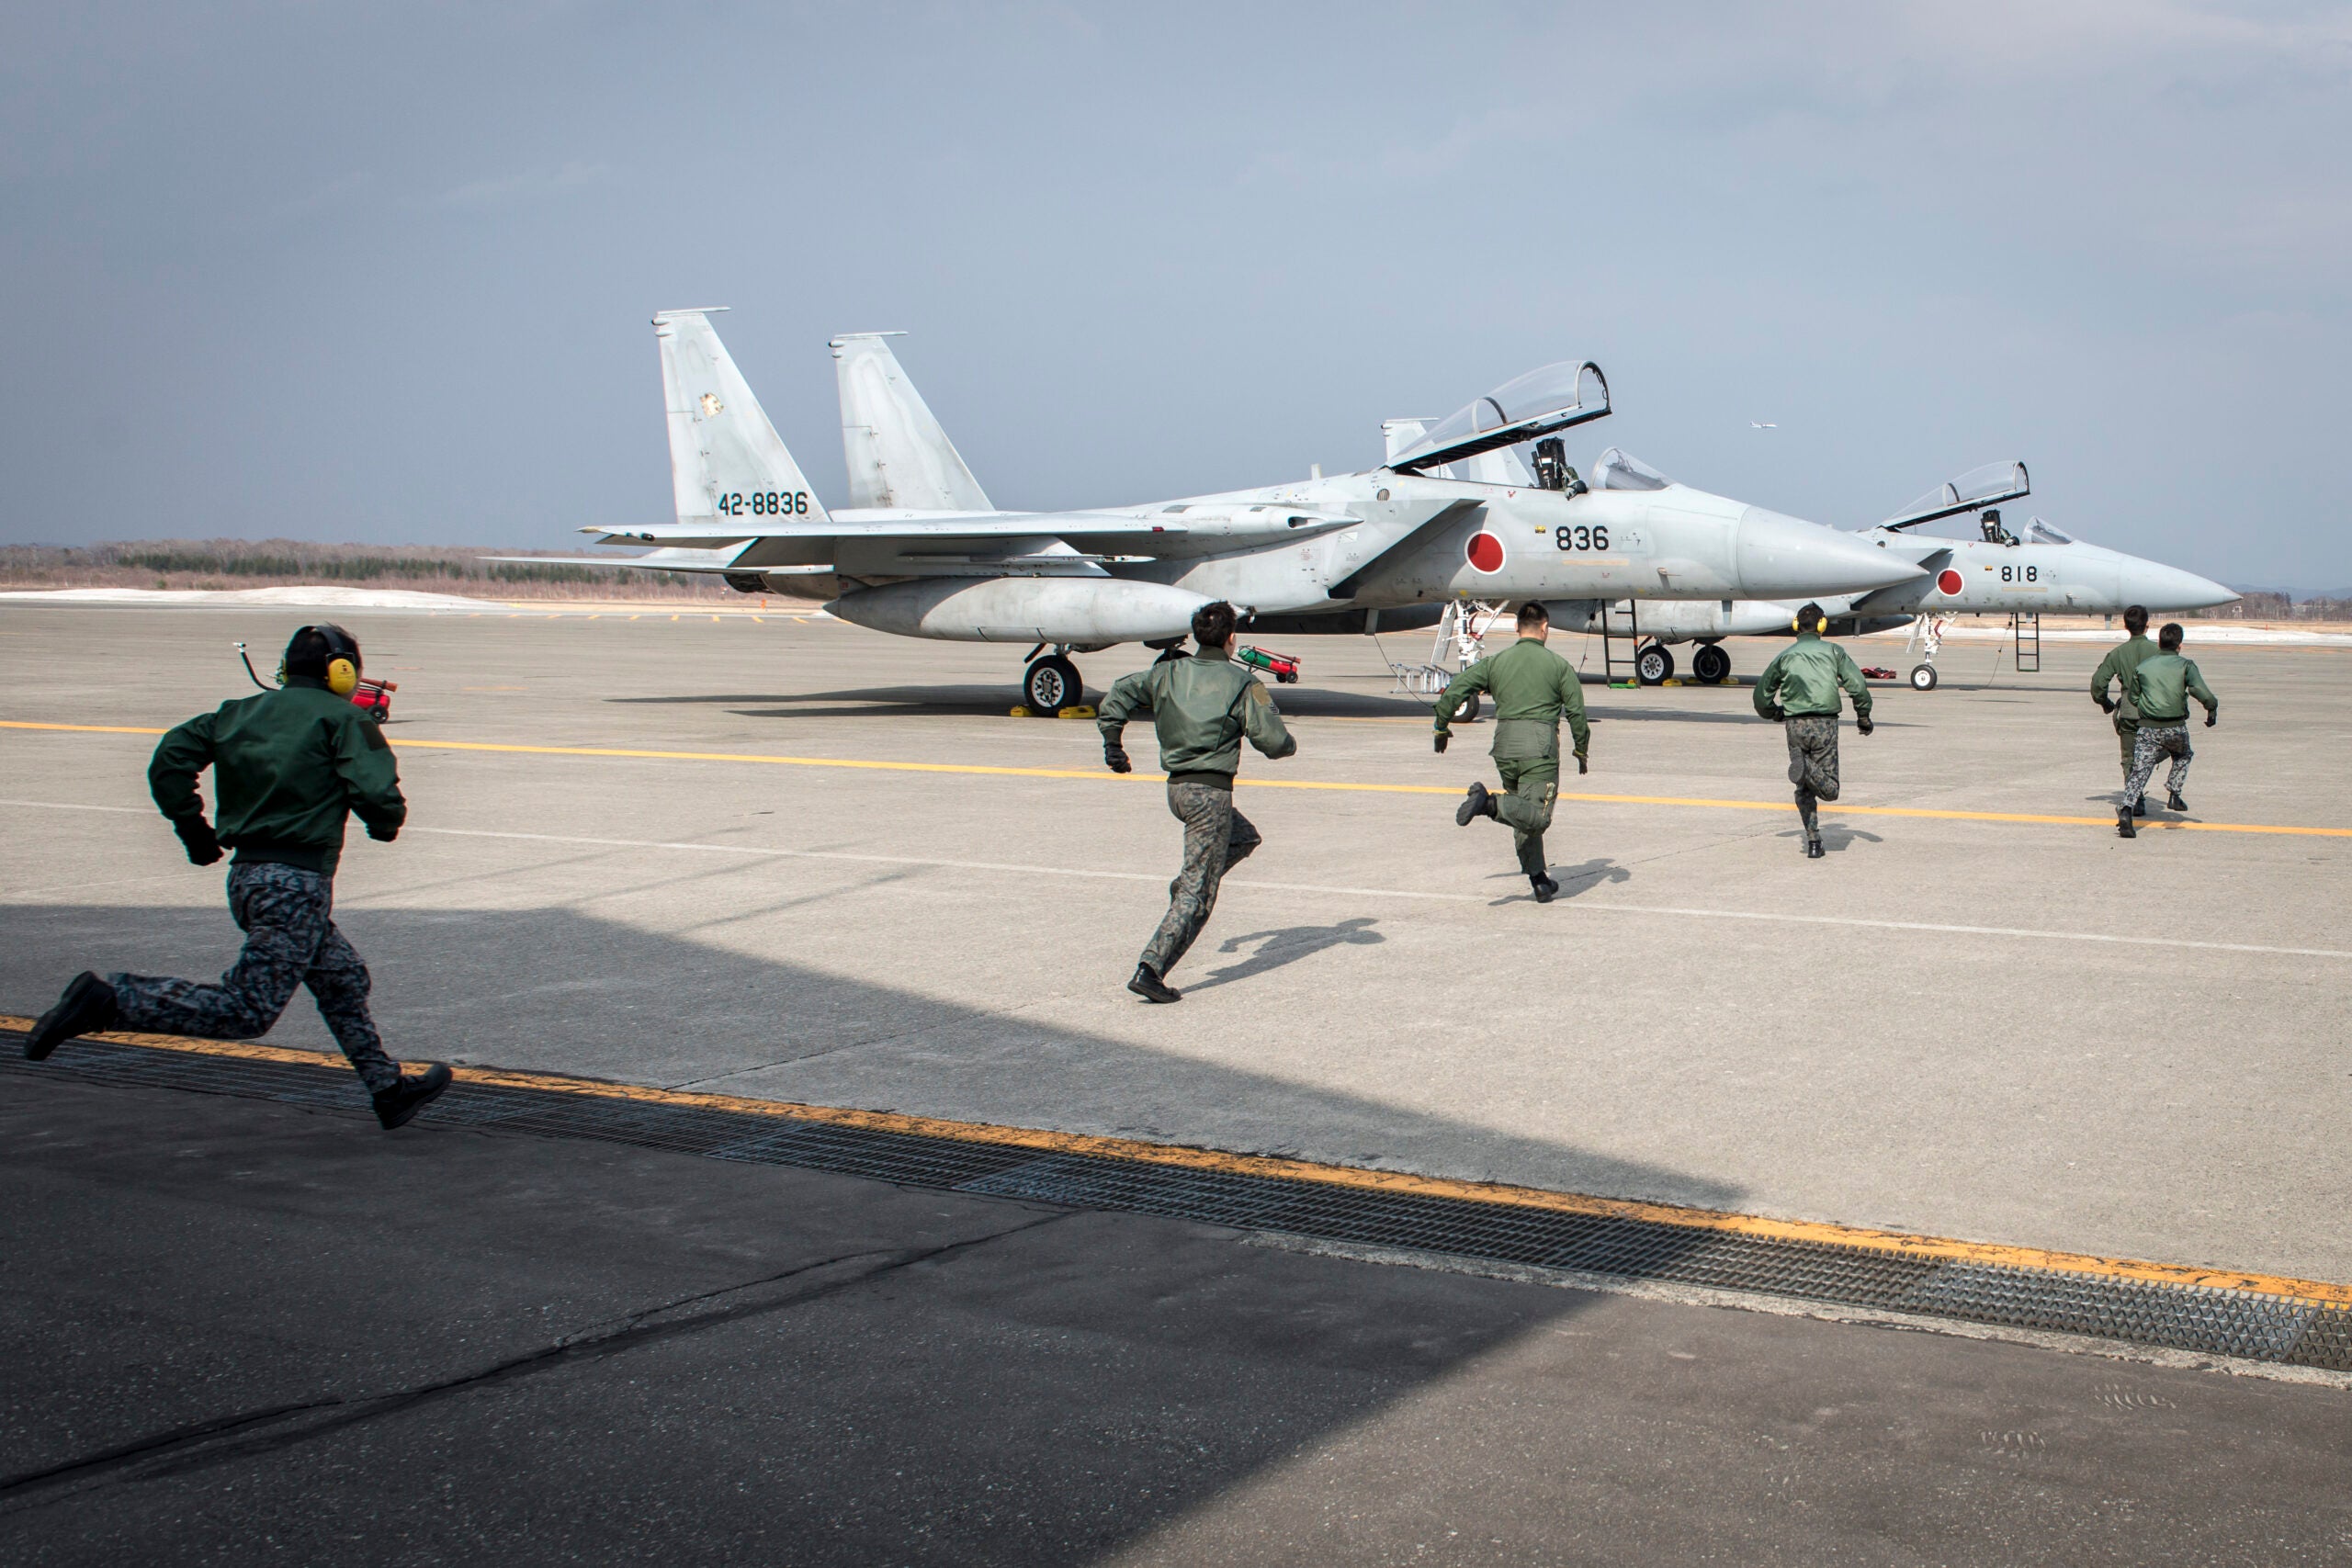 Koku-Jieitai pilots race to two Mitsubishi F-15J Eagles during a scramble demonstration as part of a 10-day U.S.-Japan Bilateral Career Training at Chitose Air Base, Japan, April 14, 2017. The scramble showcased the 2nd Air Wing’s response capability to outside threats as the installation responds to incursions into Japanese airspace every week. The F-15Js offer the Koku-Jieitai a twin-engine, all-weather air superiority fighter based on the U.S. Air Force’s McDonnell Douglas F-15 Eagle. Koku-Jieitai is the traditional term for Japan Air Self Defense Force used by the Japanese military. (U.S. Air Force photo by Tech. Sgt. Benjamin W. Stratton)